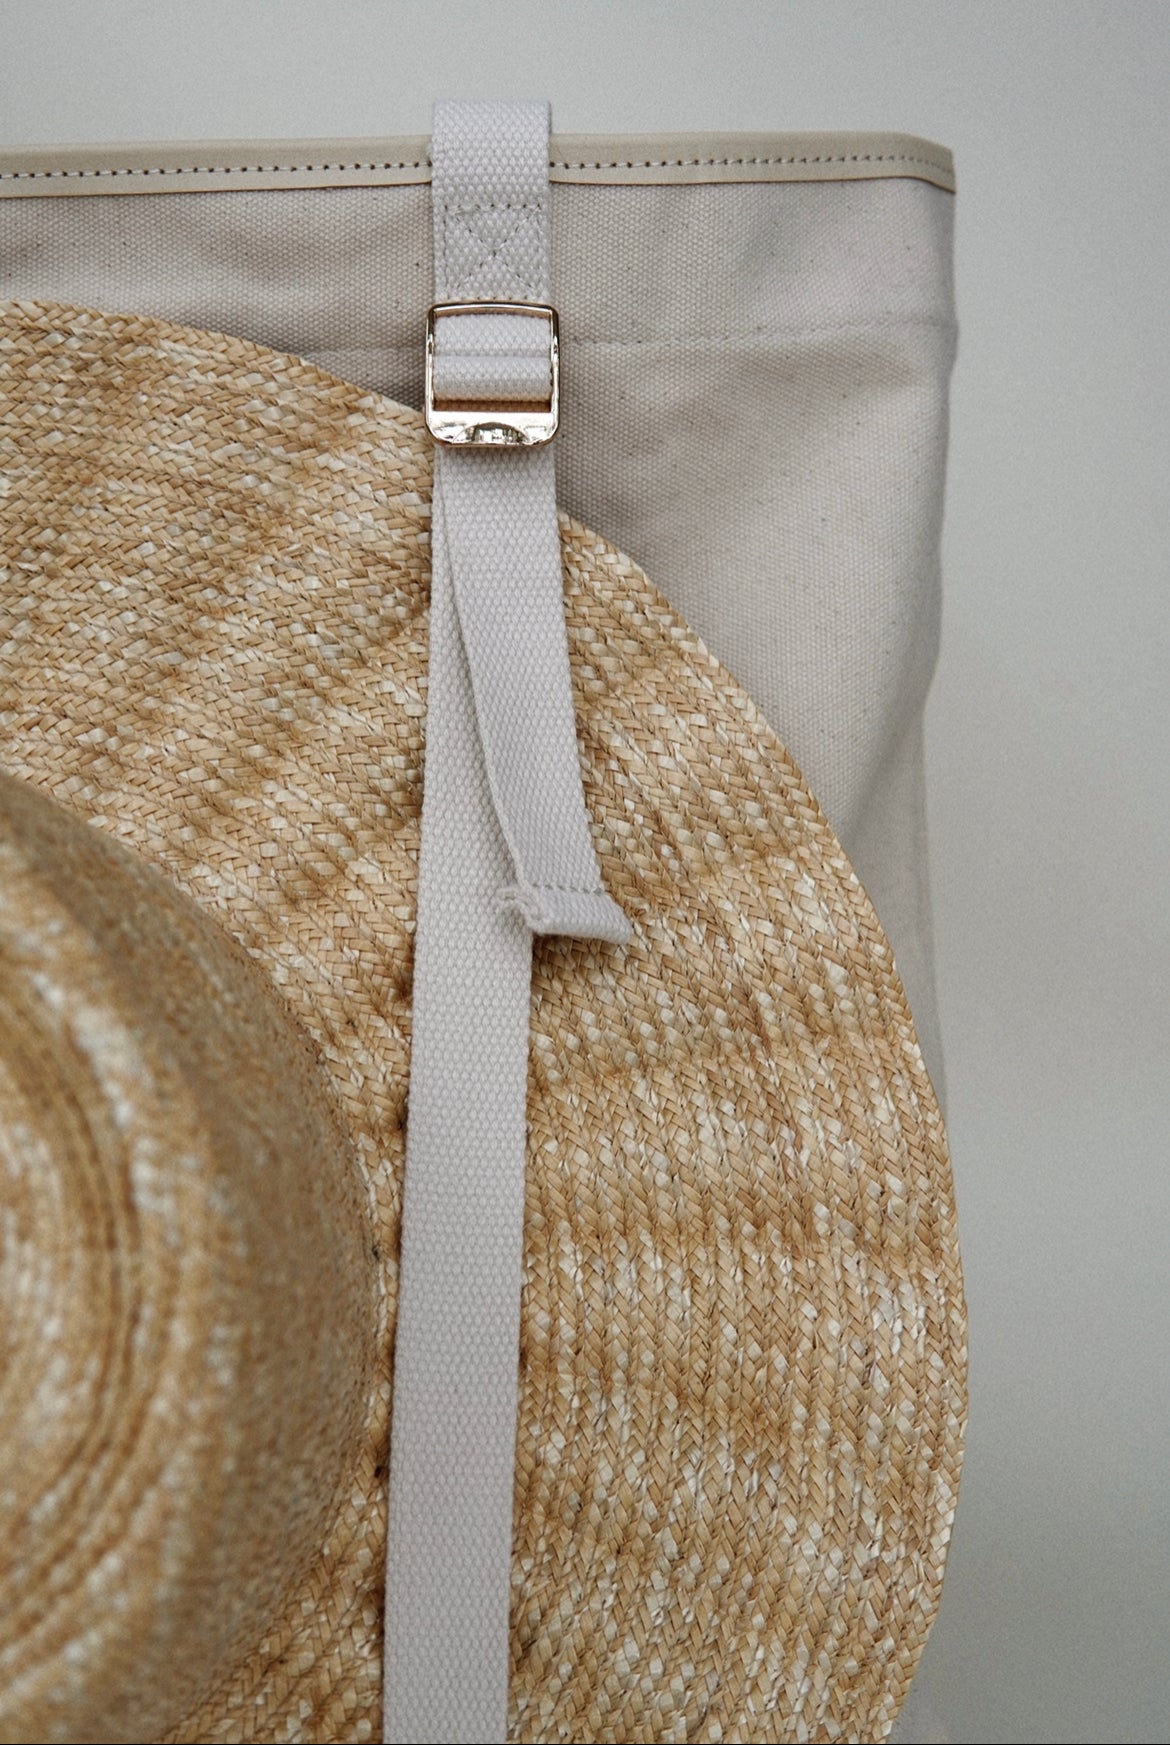 Hat travel bag, hat carrying tote, carry-on hat travel. Perfect carry-on hat bag, make any hat packable with this hat bag, beach bag